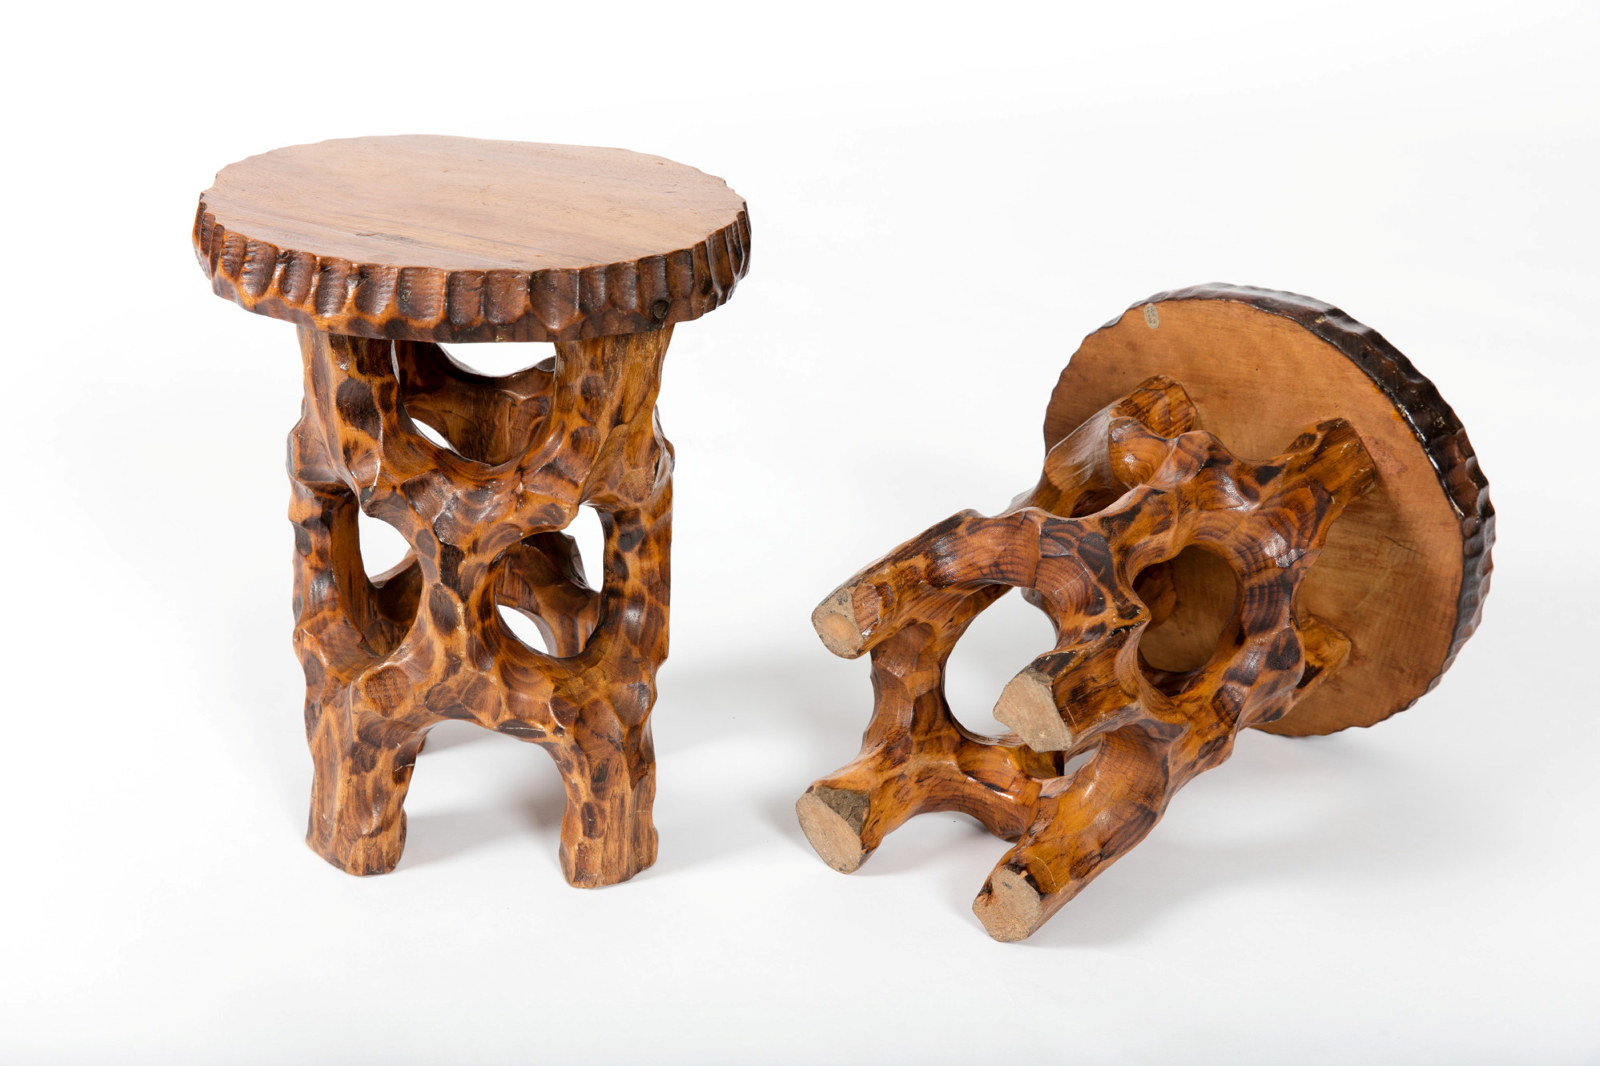 Pair of carved round topped tables with rustic timber legs.